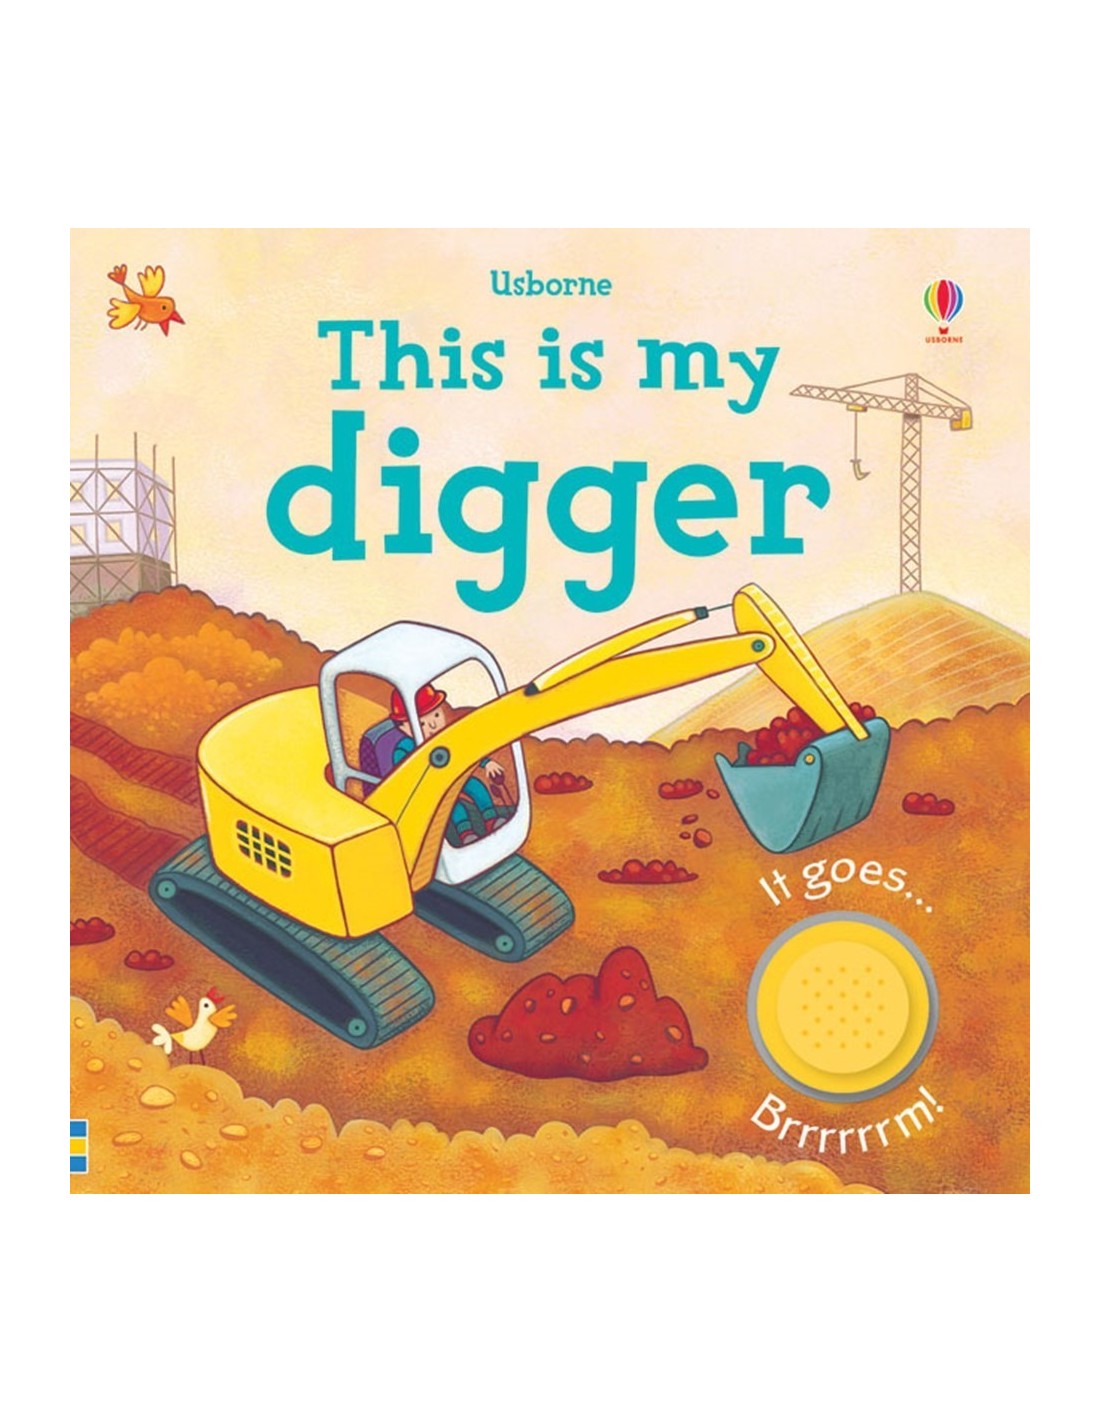 This is my digger